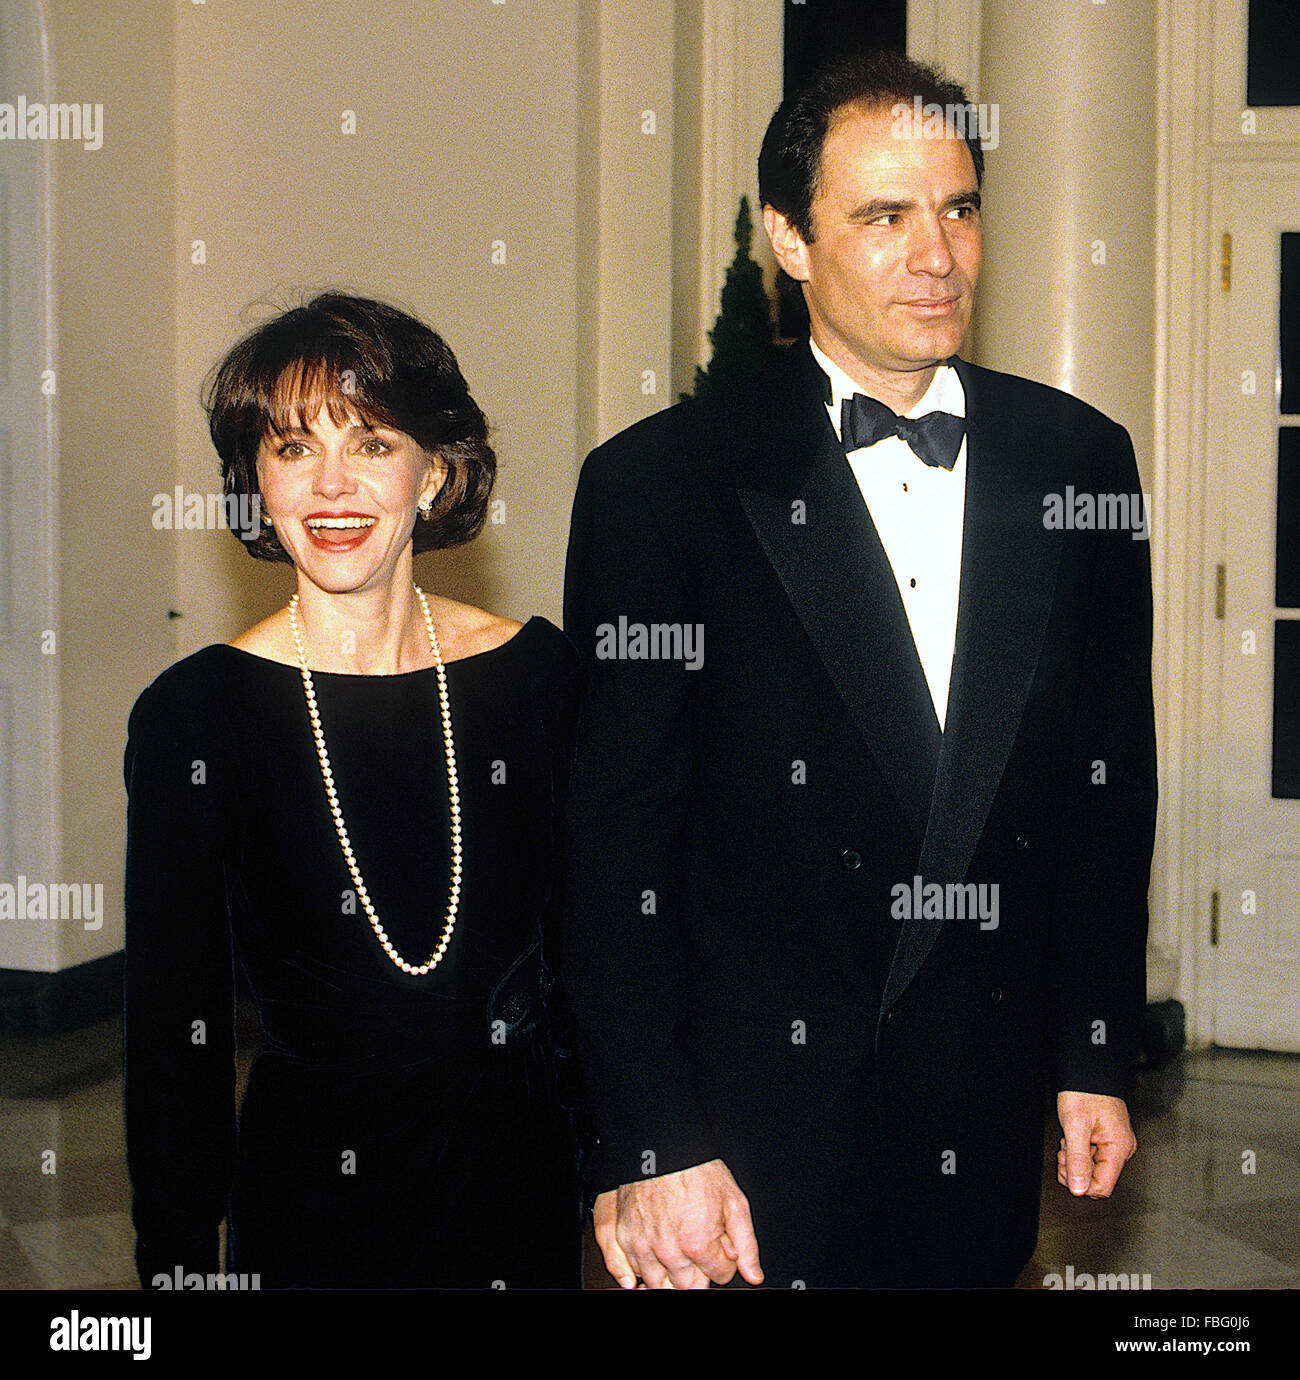 Washington, DC., USA, 6th December,1992 Sally Field and her husband Alan Greisman arrive at the White House for the Kennedy Center Honors. Sally Margaret Field is an American actress, singer, producer, director, and screenwriter. She is known for her leading American TV and film roles, most notably in Gidget (1965-66), The Flying Nun (1967-70), Sybil (1976), Smokey and the Bandit (1977), Hooper (1978), Norma Rae (1979), Absence of Malice (1981), Places in the Heart (1984), Steel Magnolias (1989), Not Without My Daughter (1991), Mrs. Doubtfire (1993), Forrest Gump (1994), Credit: Mark Reinstein Stock Photo